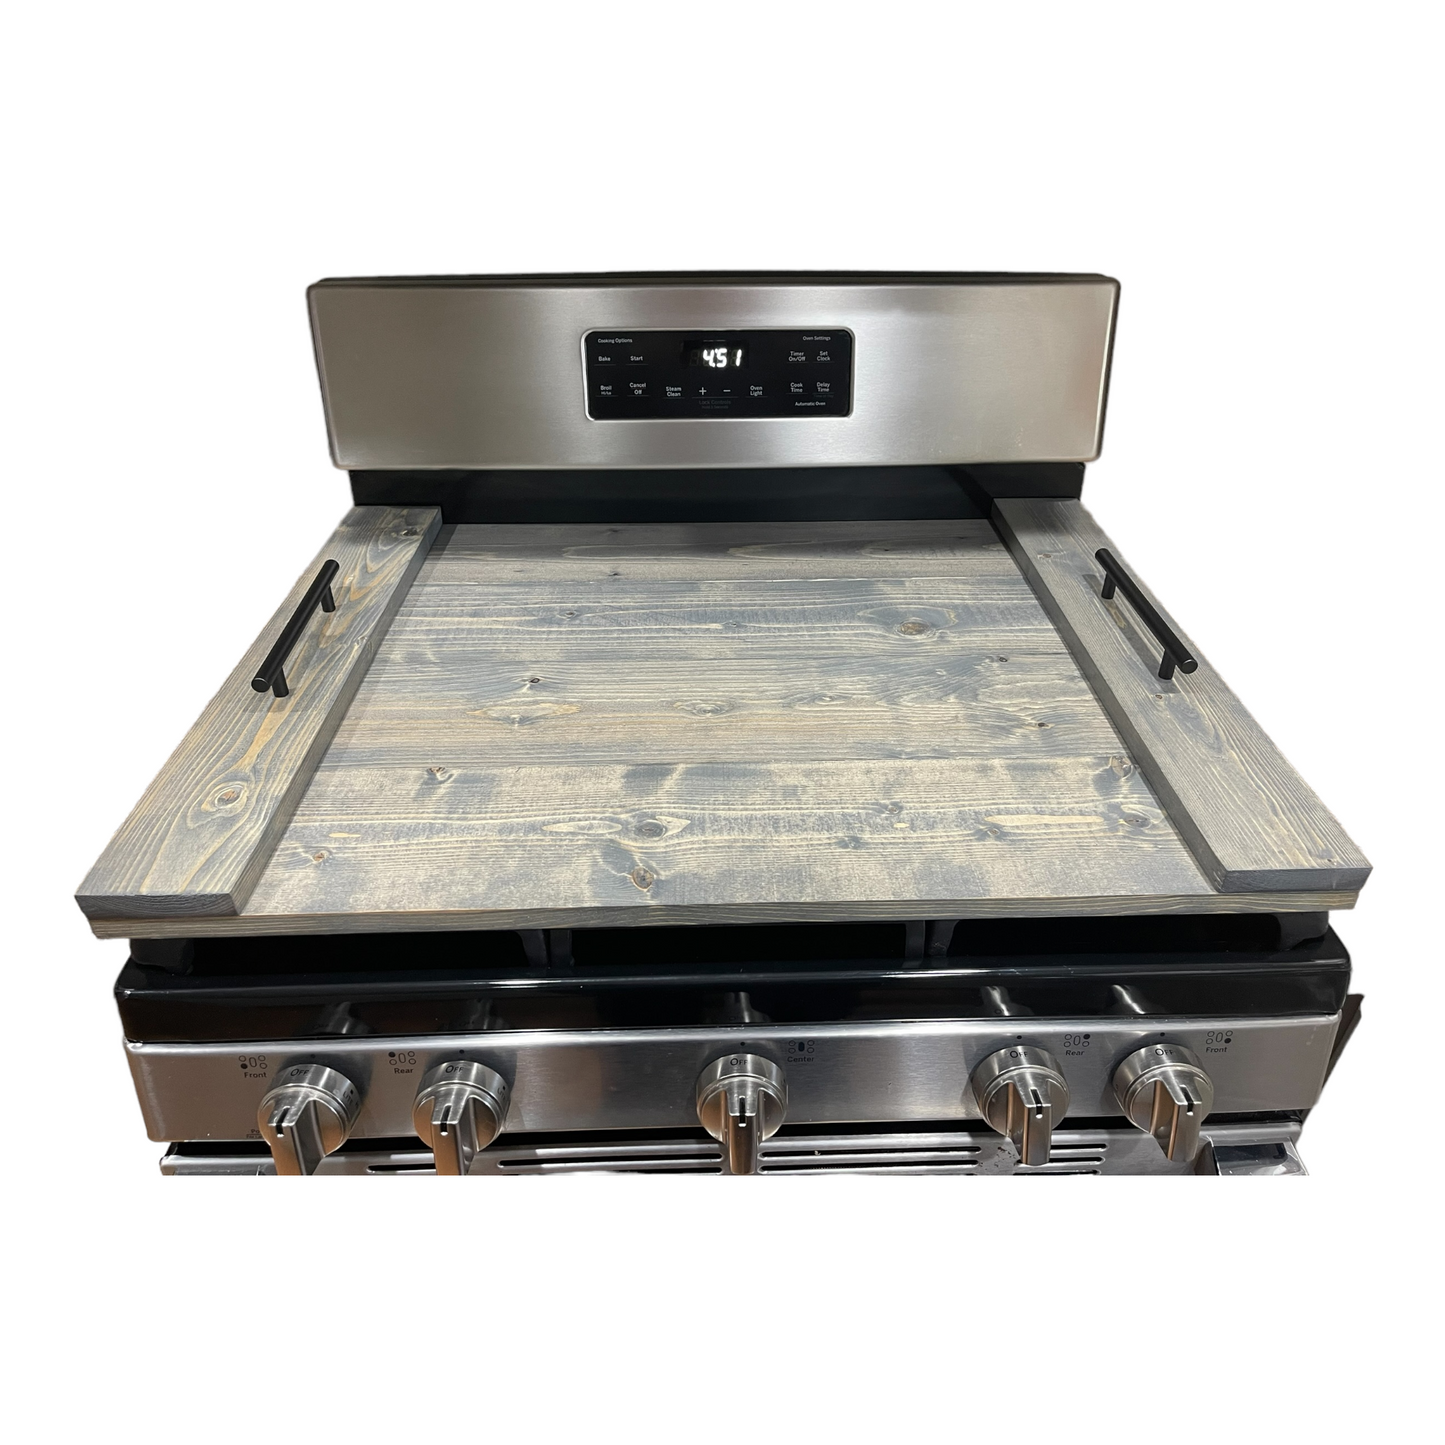 Handmade Industrial Farmhouse Stove Top Cover Noodle Board / Serving Tray Aged Barrel with Black Handles